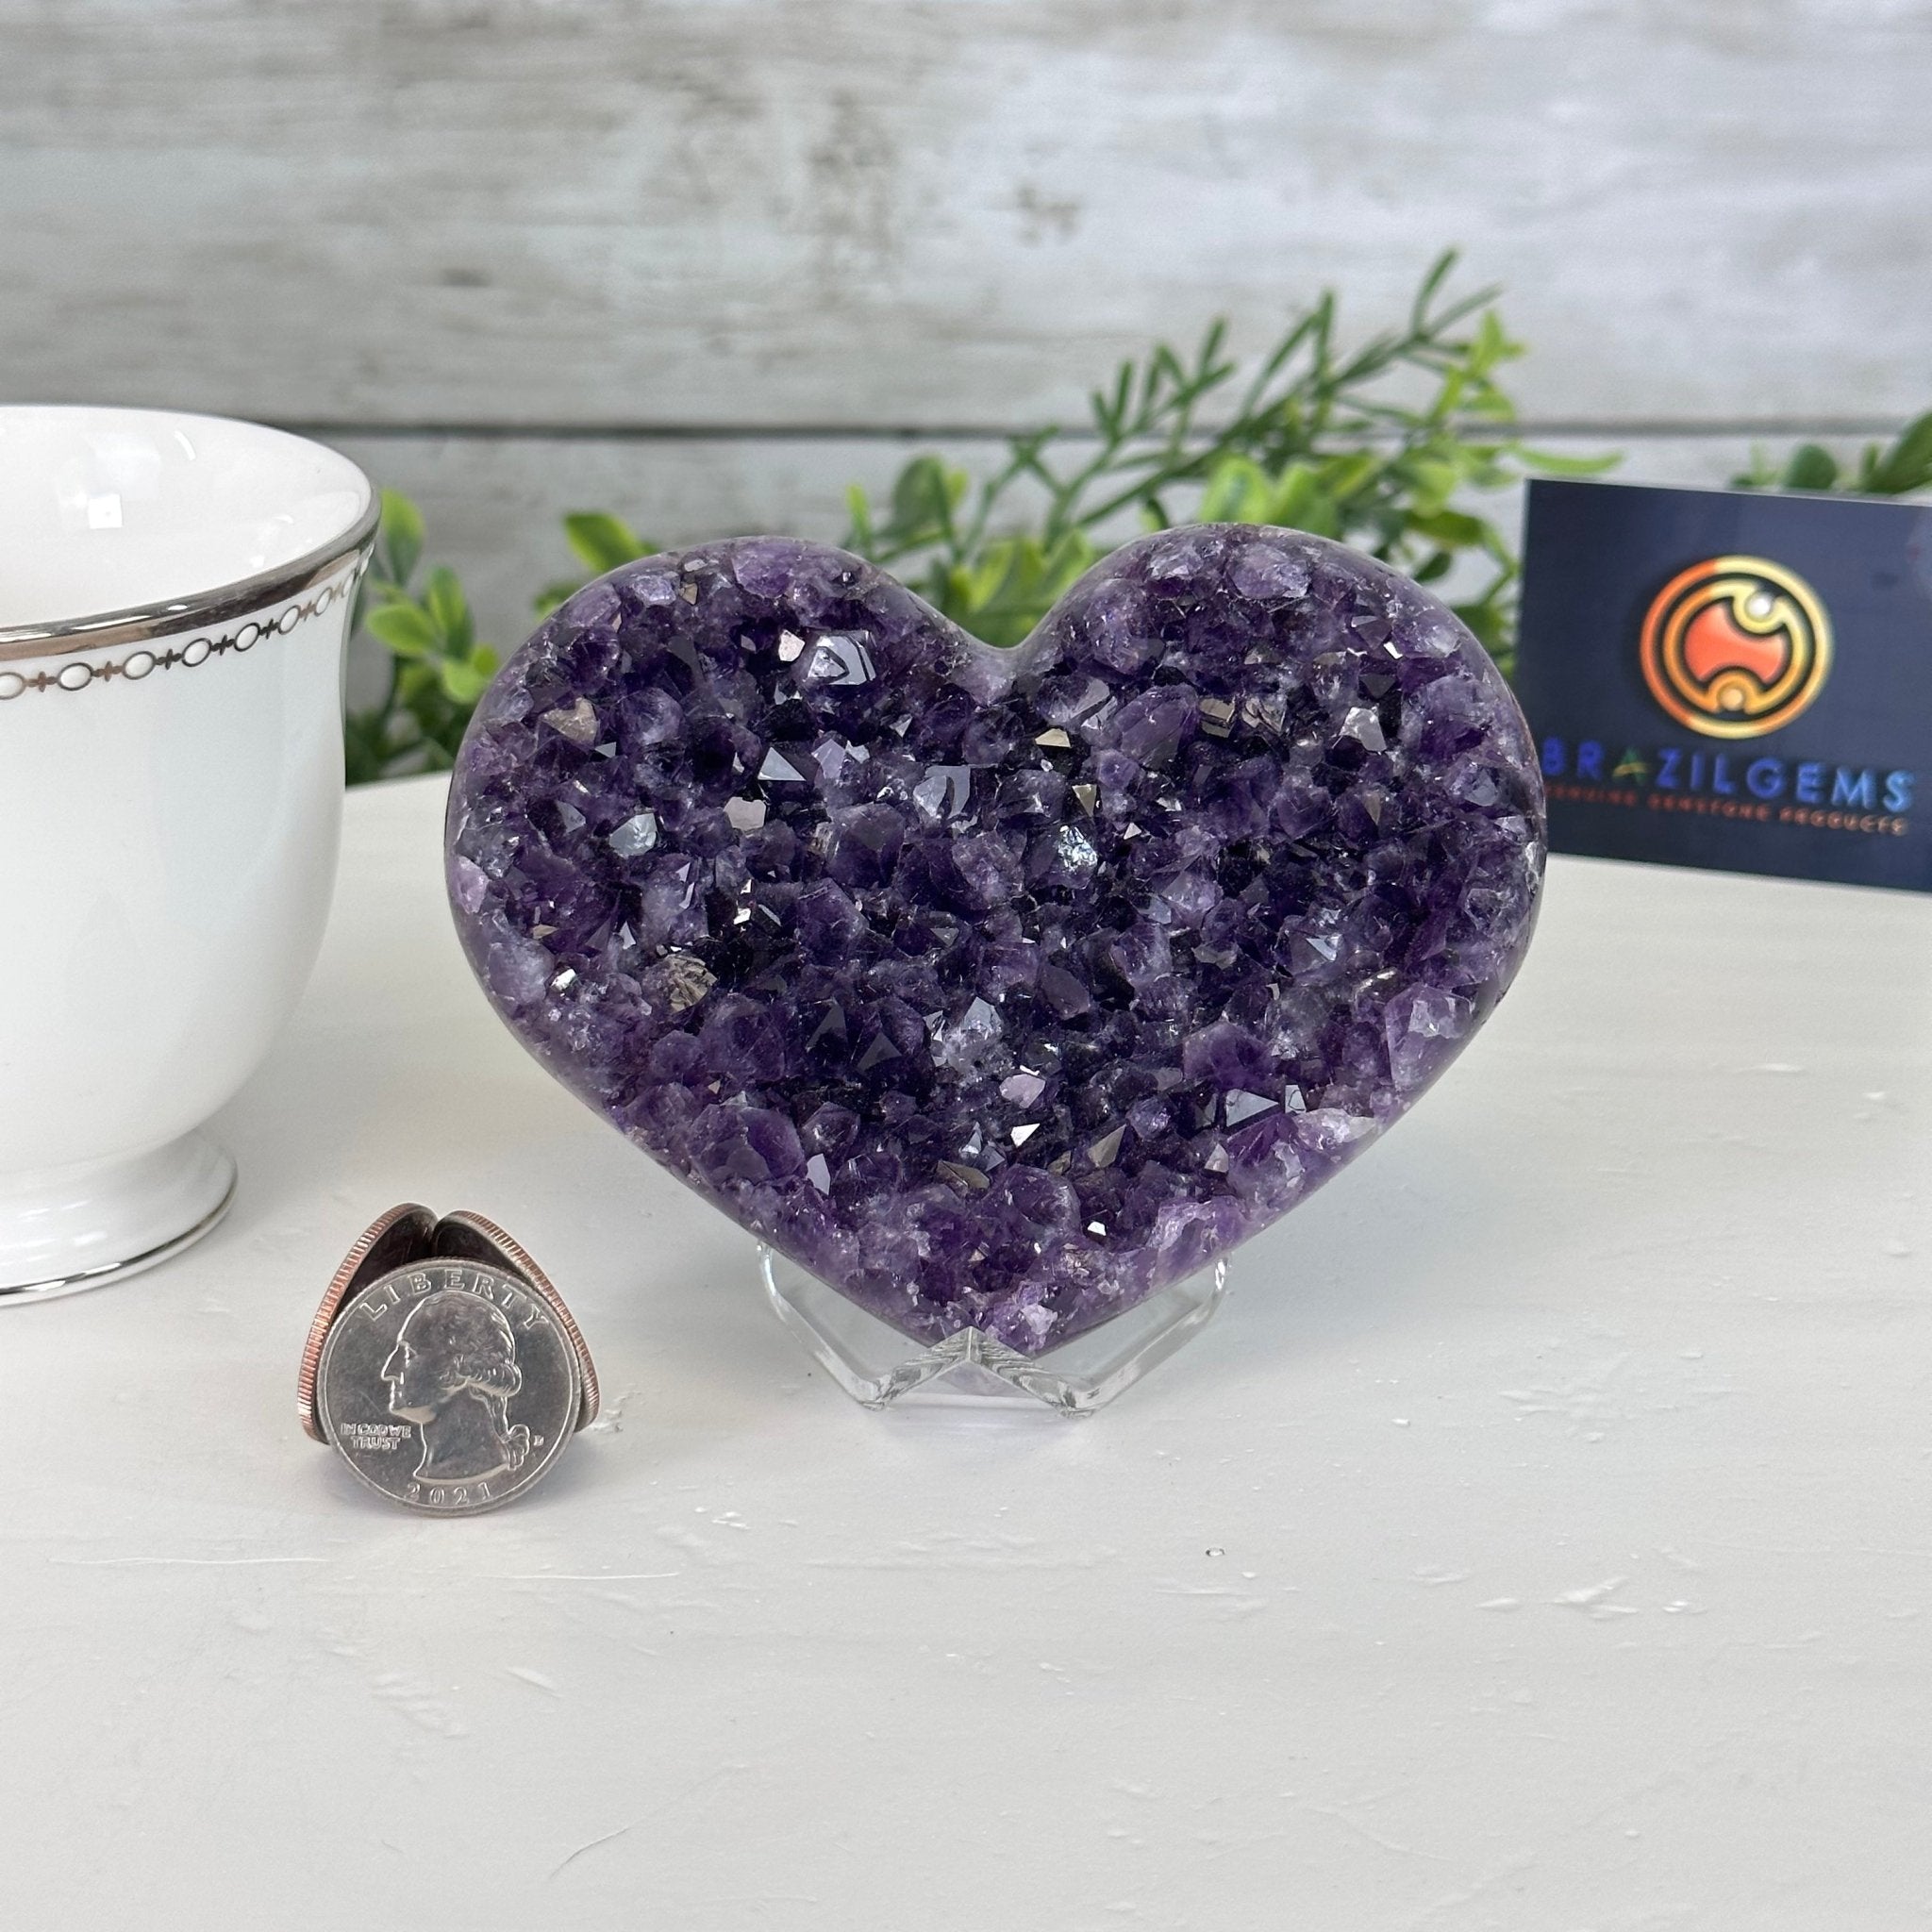 Extra Plus Quality Amethyst Heart Geode on an Acrylic Stand, 0.93 lbs & 3" Tall #5462-0052 by Brazil Gems - Brazil GemsBrazil GemsExtra Plus Quality Amethyst Heart Geode on an Acrylic Stand, 0.93 lbs & 3" Tall #5462-0052 by Brazil GemsHearts5462-0052